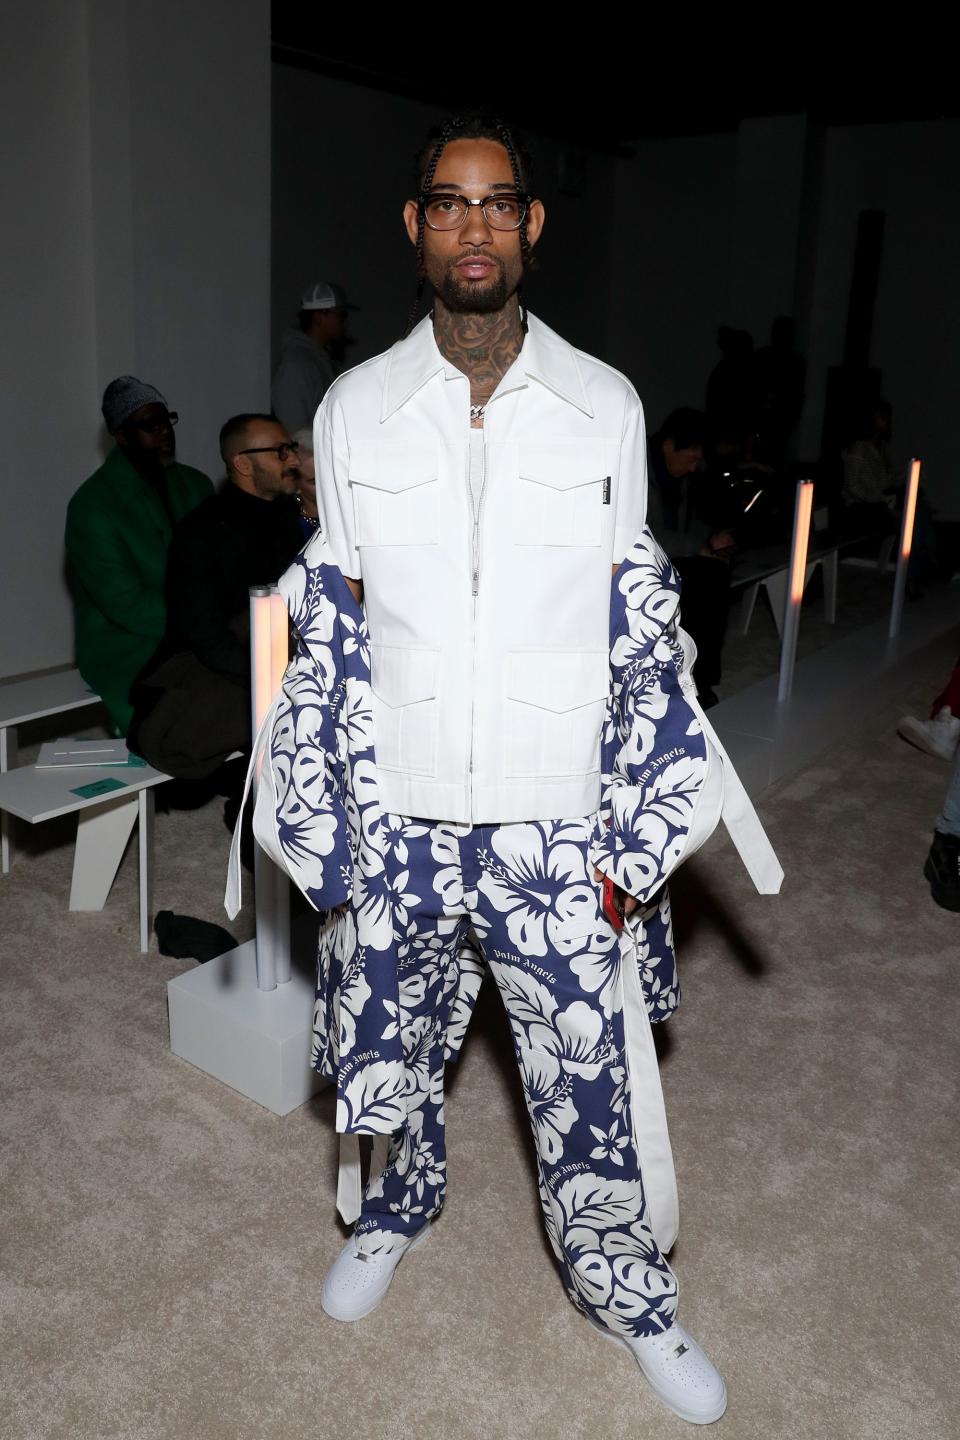 PnB Rock attends Palm Angels: The Shows during New York Fashion Week on February 09, 2020 in New York City.